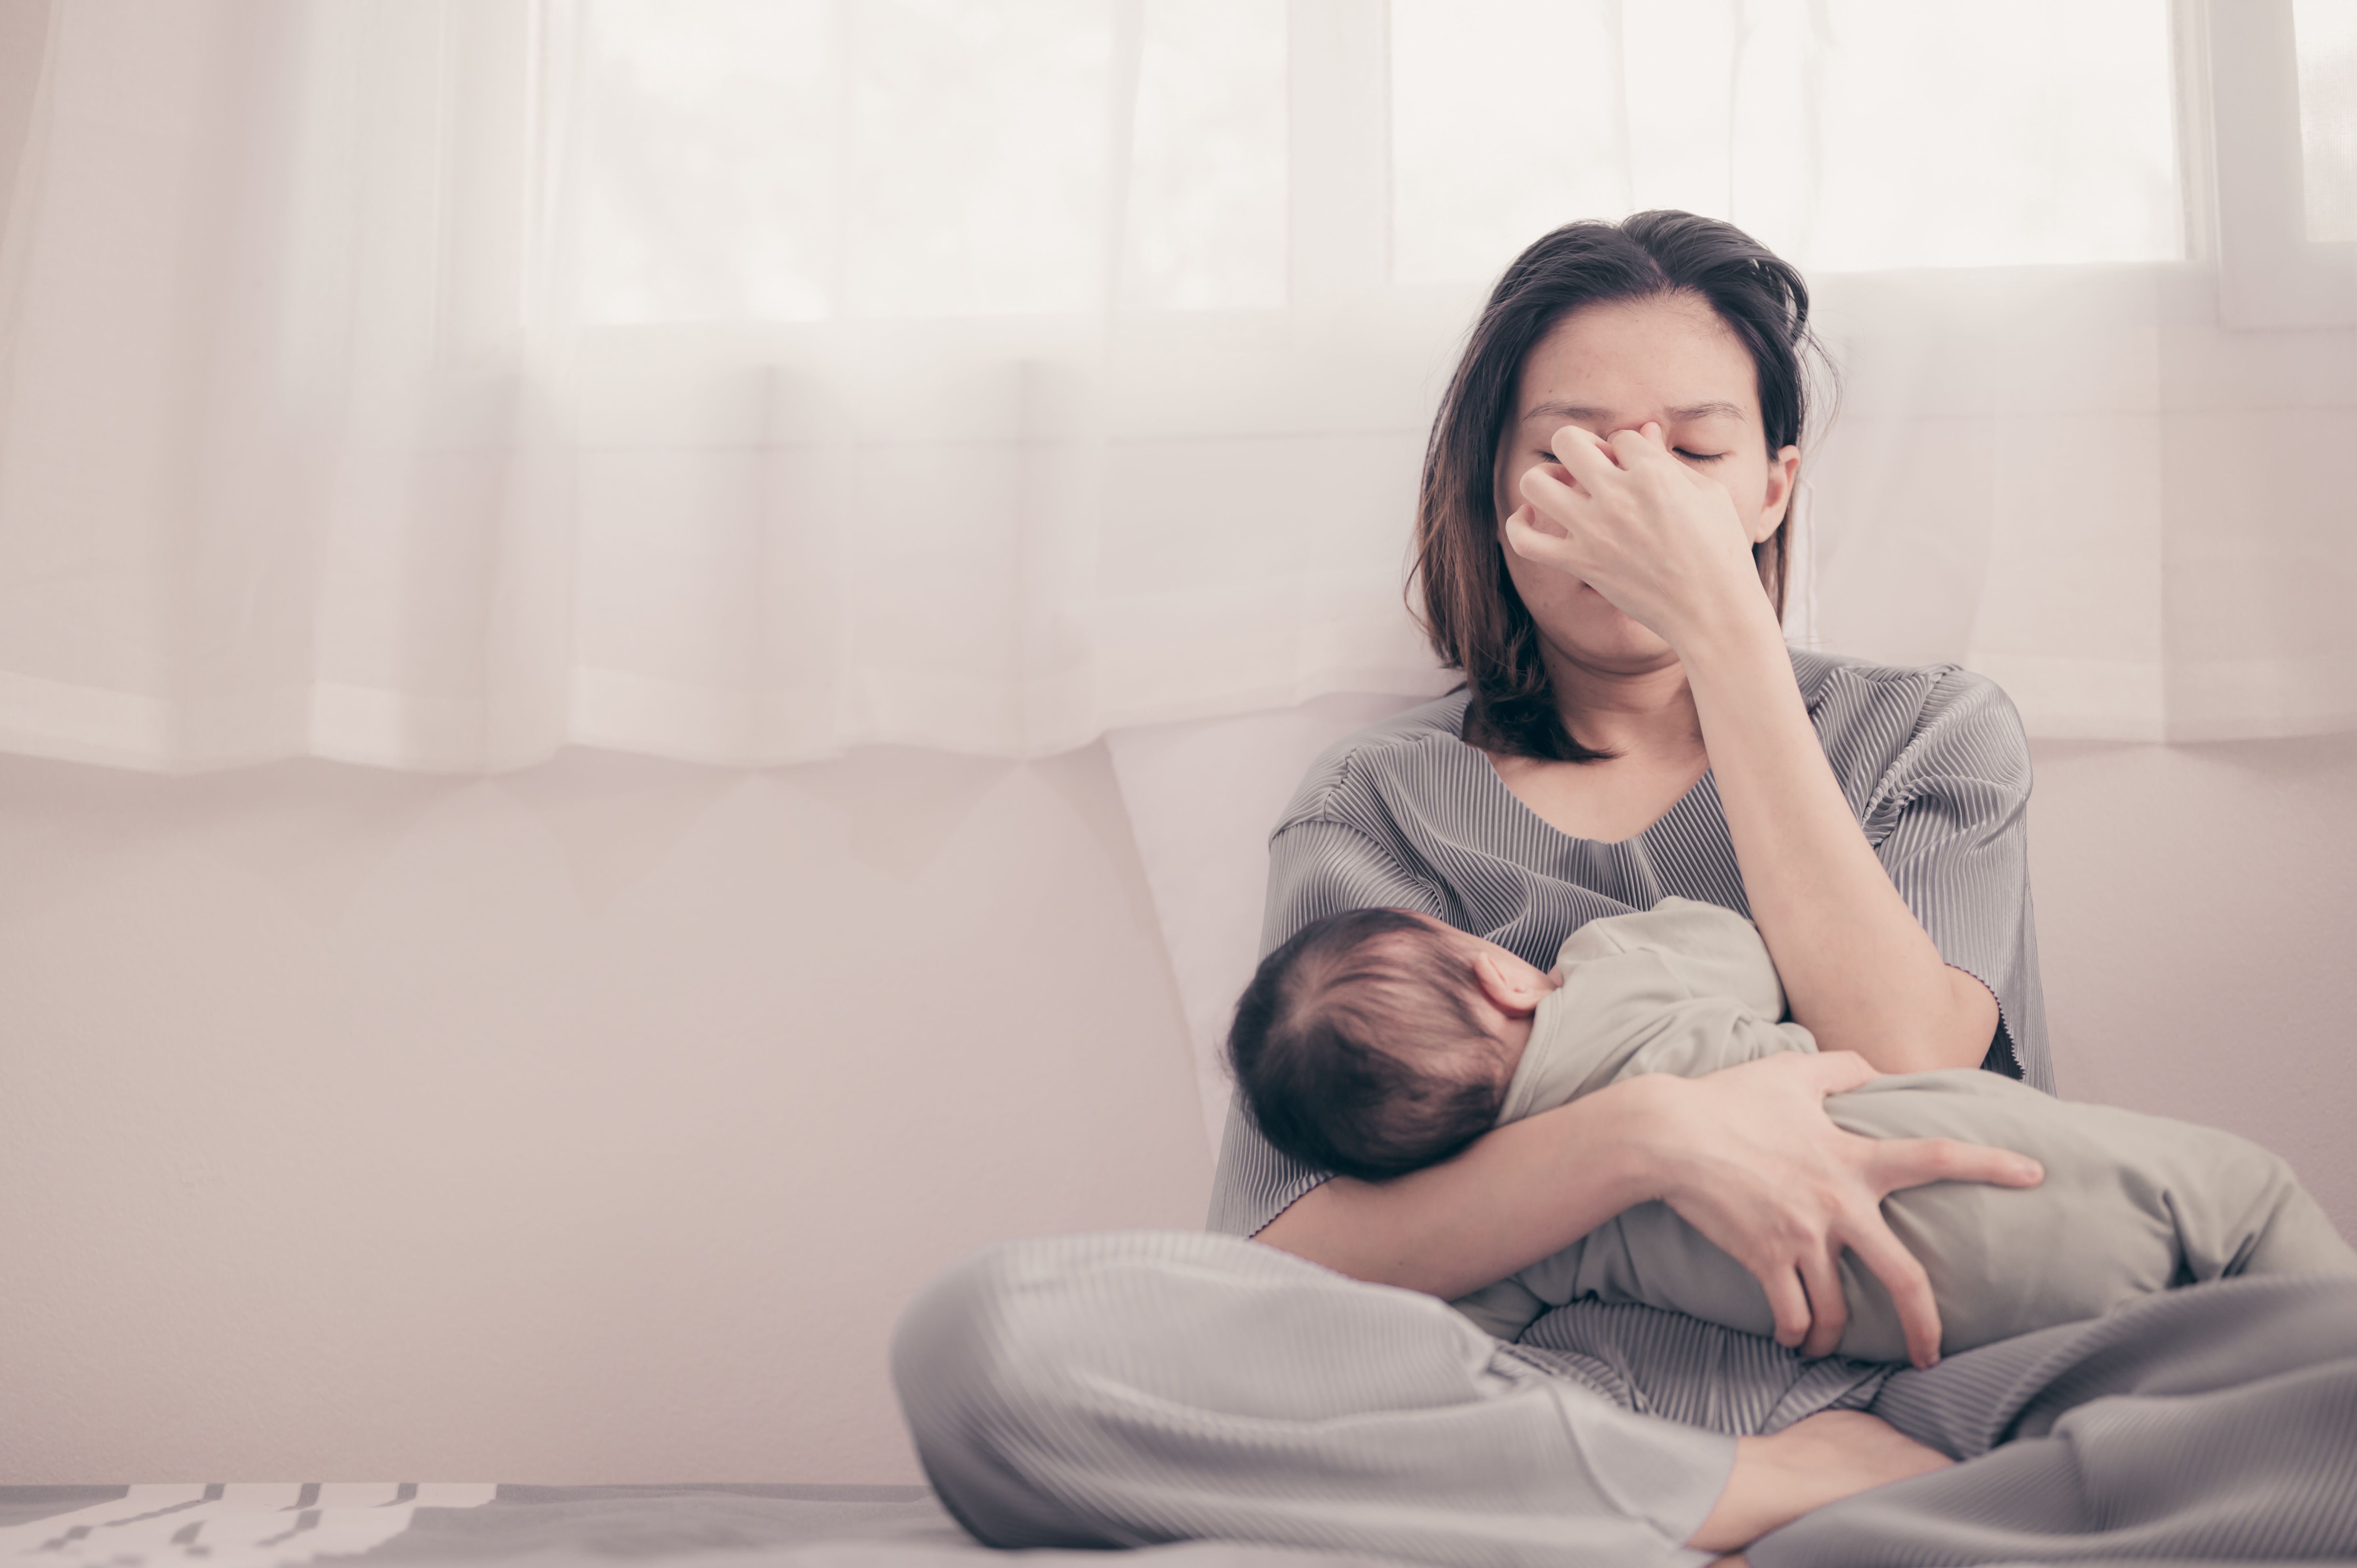 Tired Mother Suffering from experiencing postnatal depression.Health care single mom motherhood stressful. | Image Credit: grooveriderz - stock.adobe.com